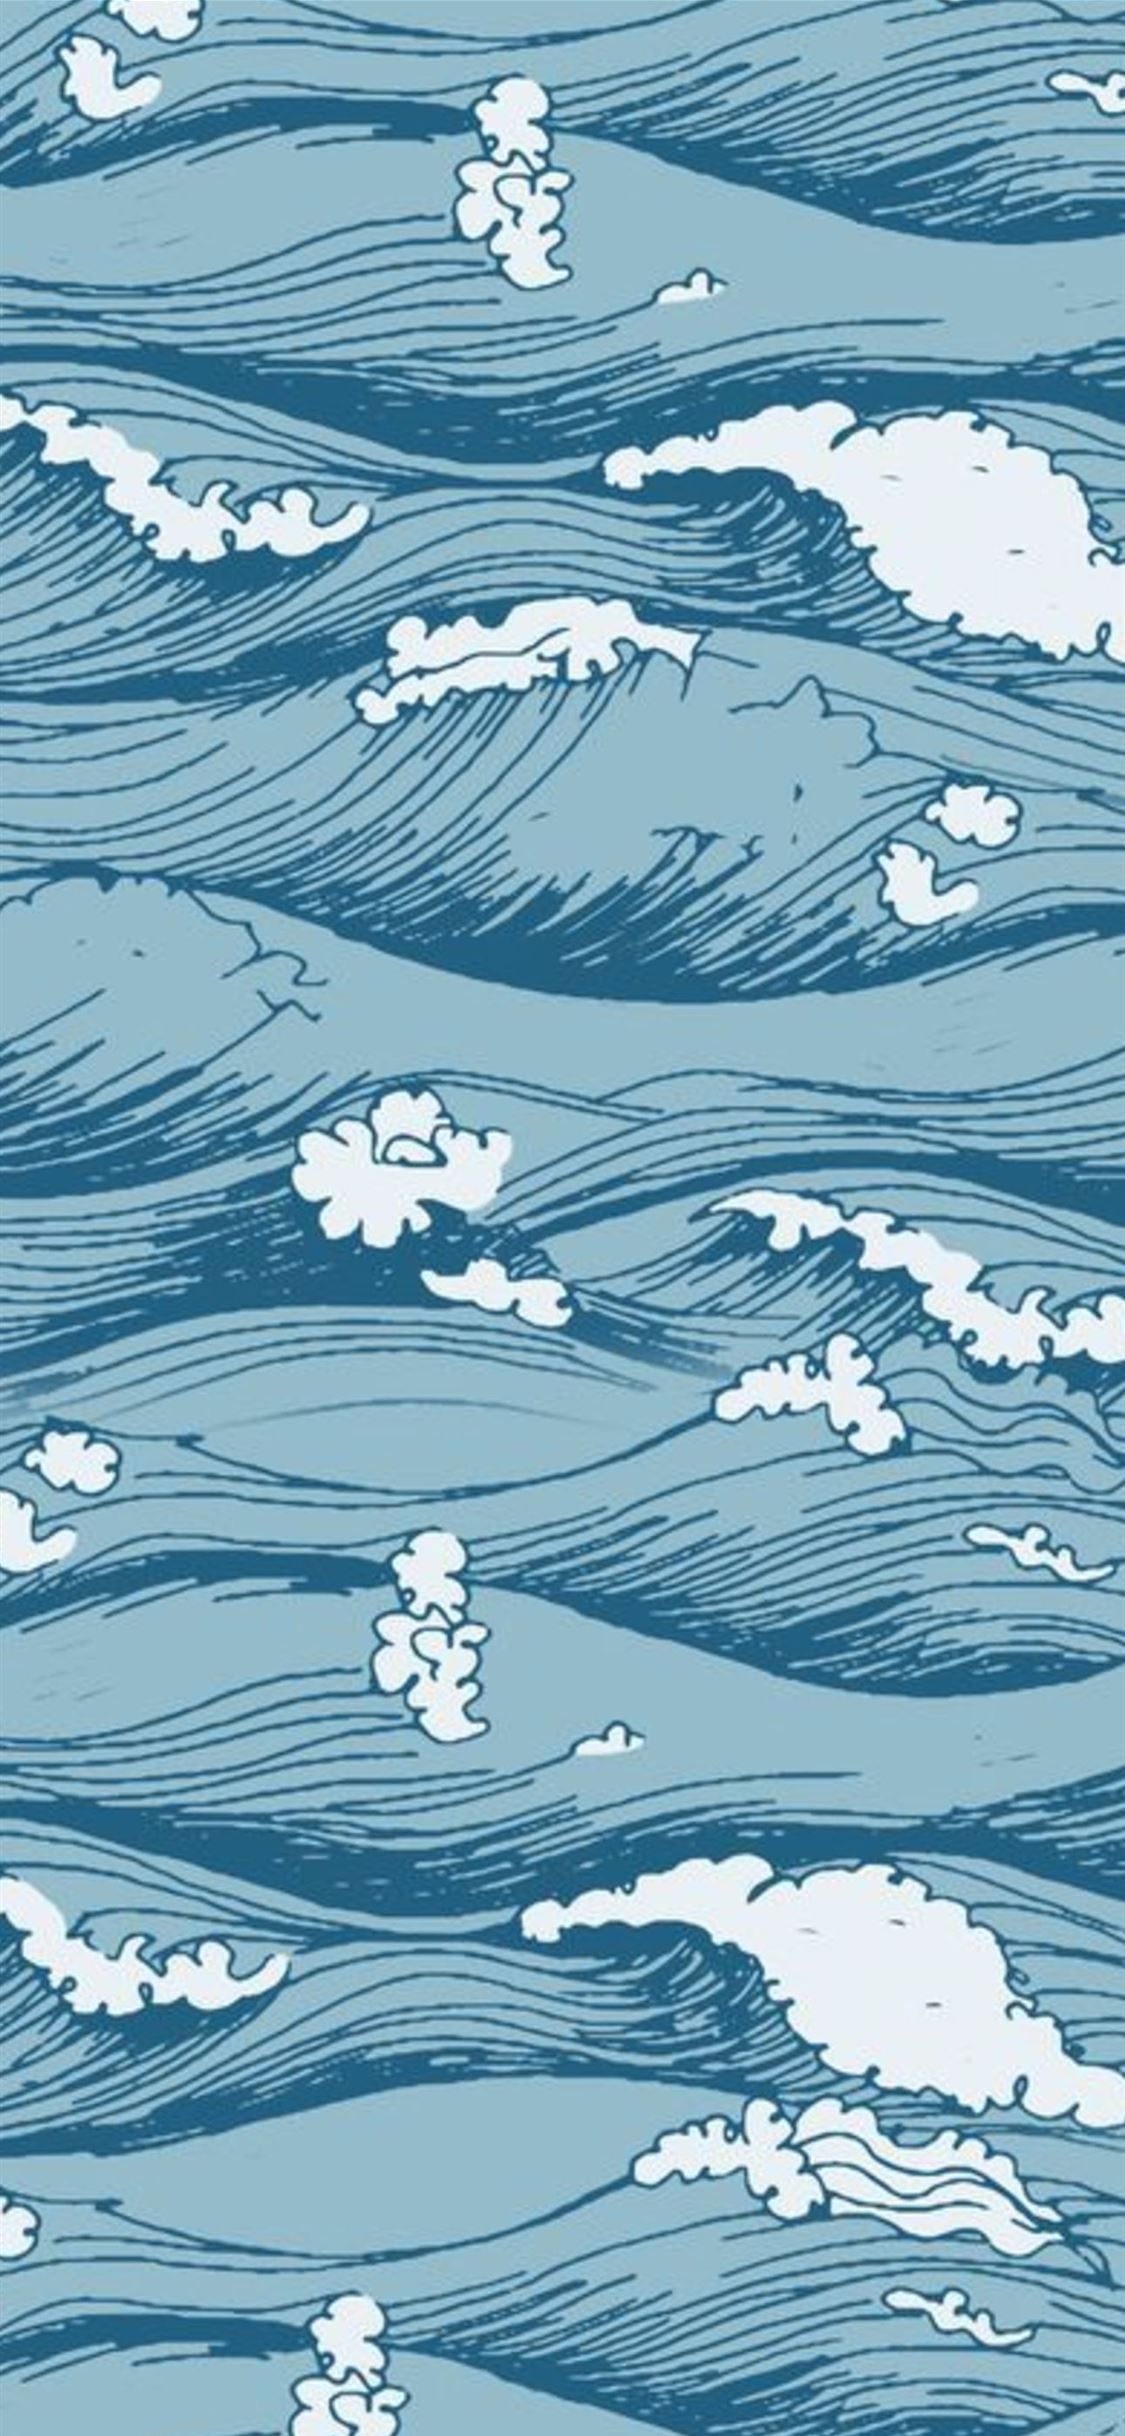 A blue and white pattern with waves - Wave